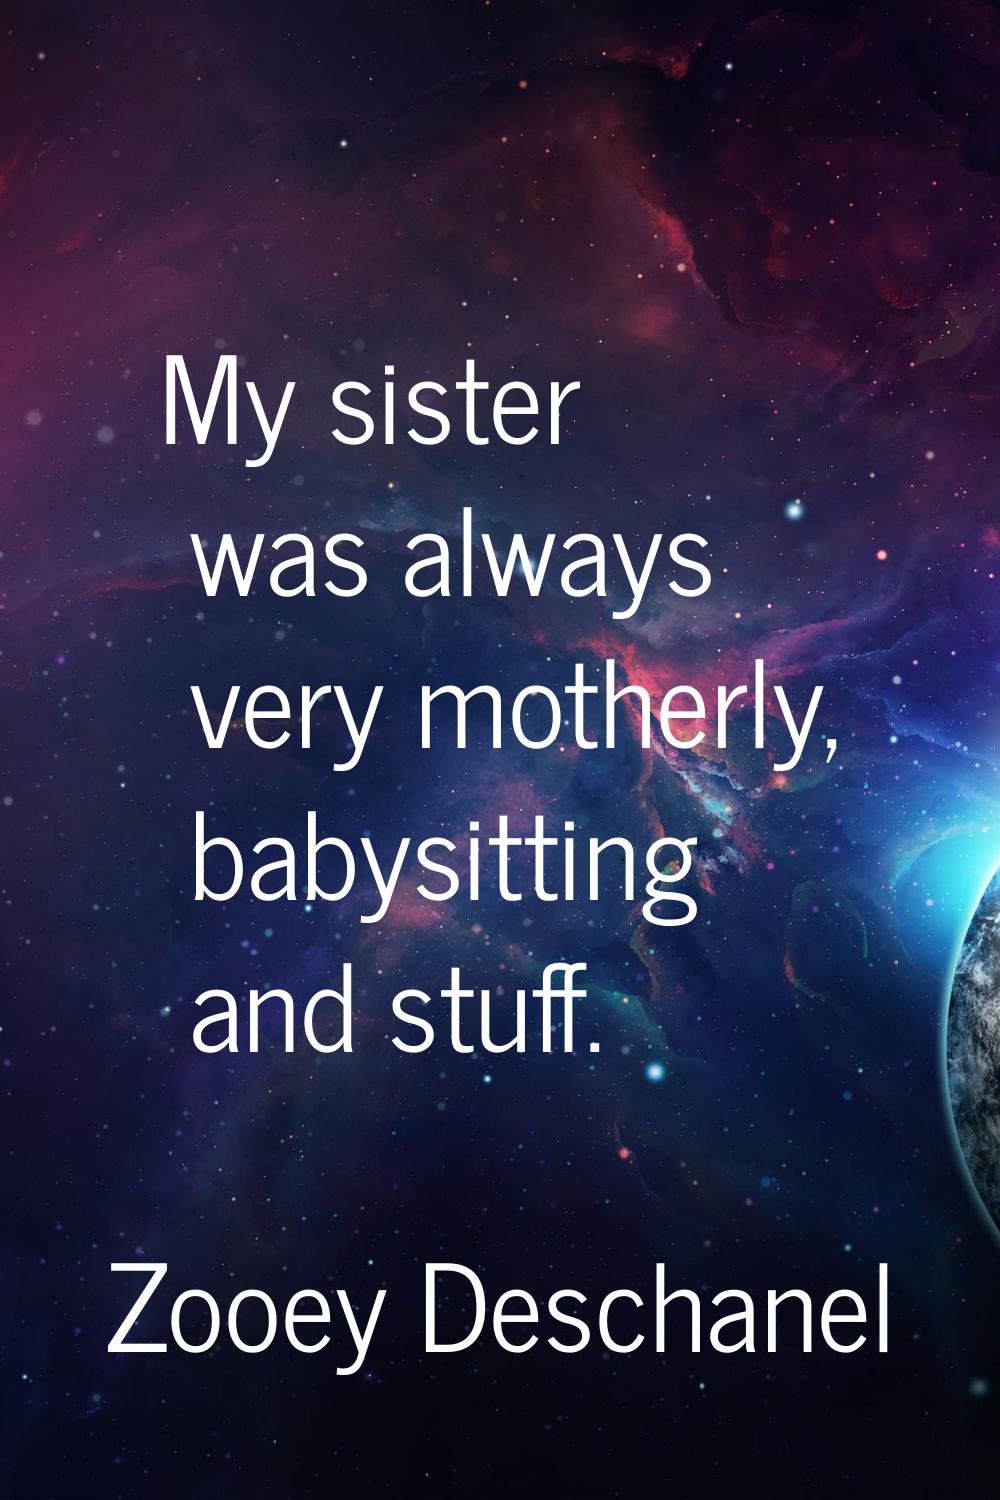 My sister was always very motherly, babysitting and stuff.